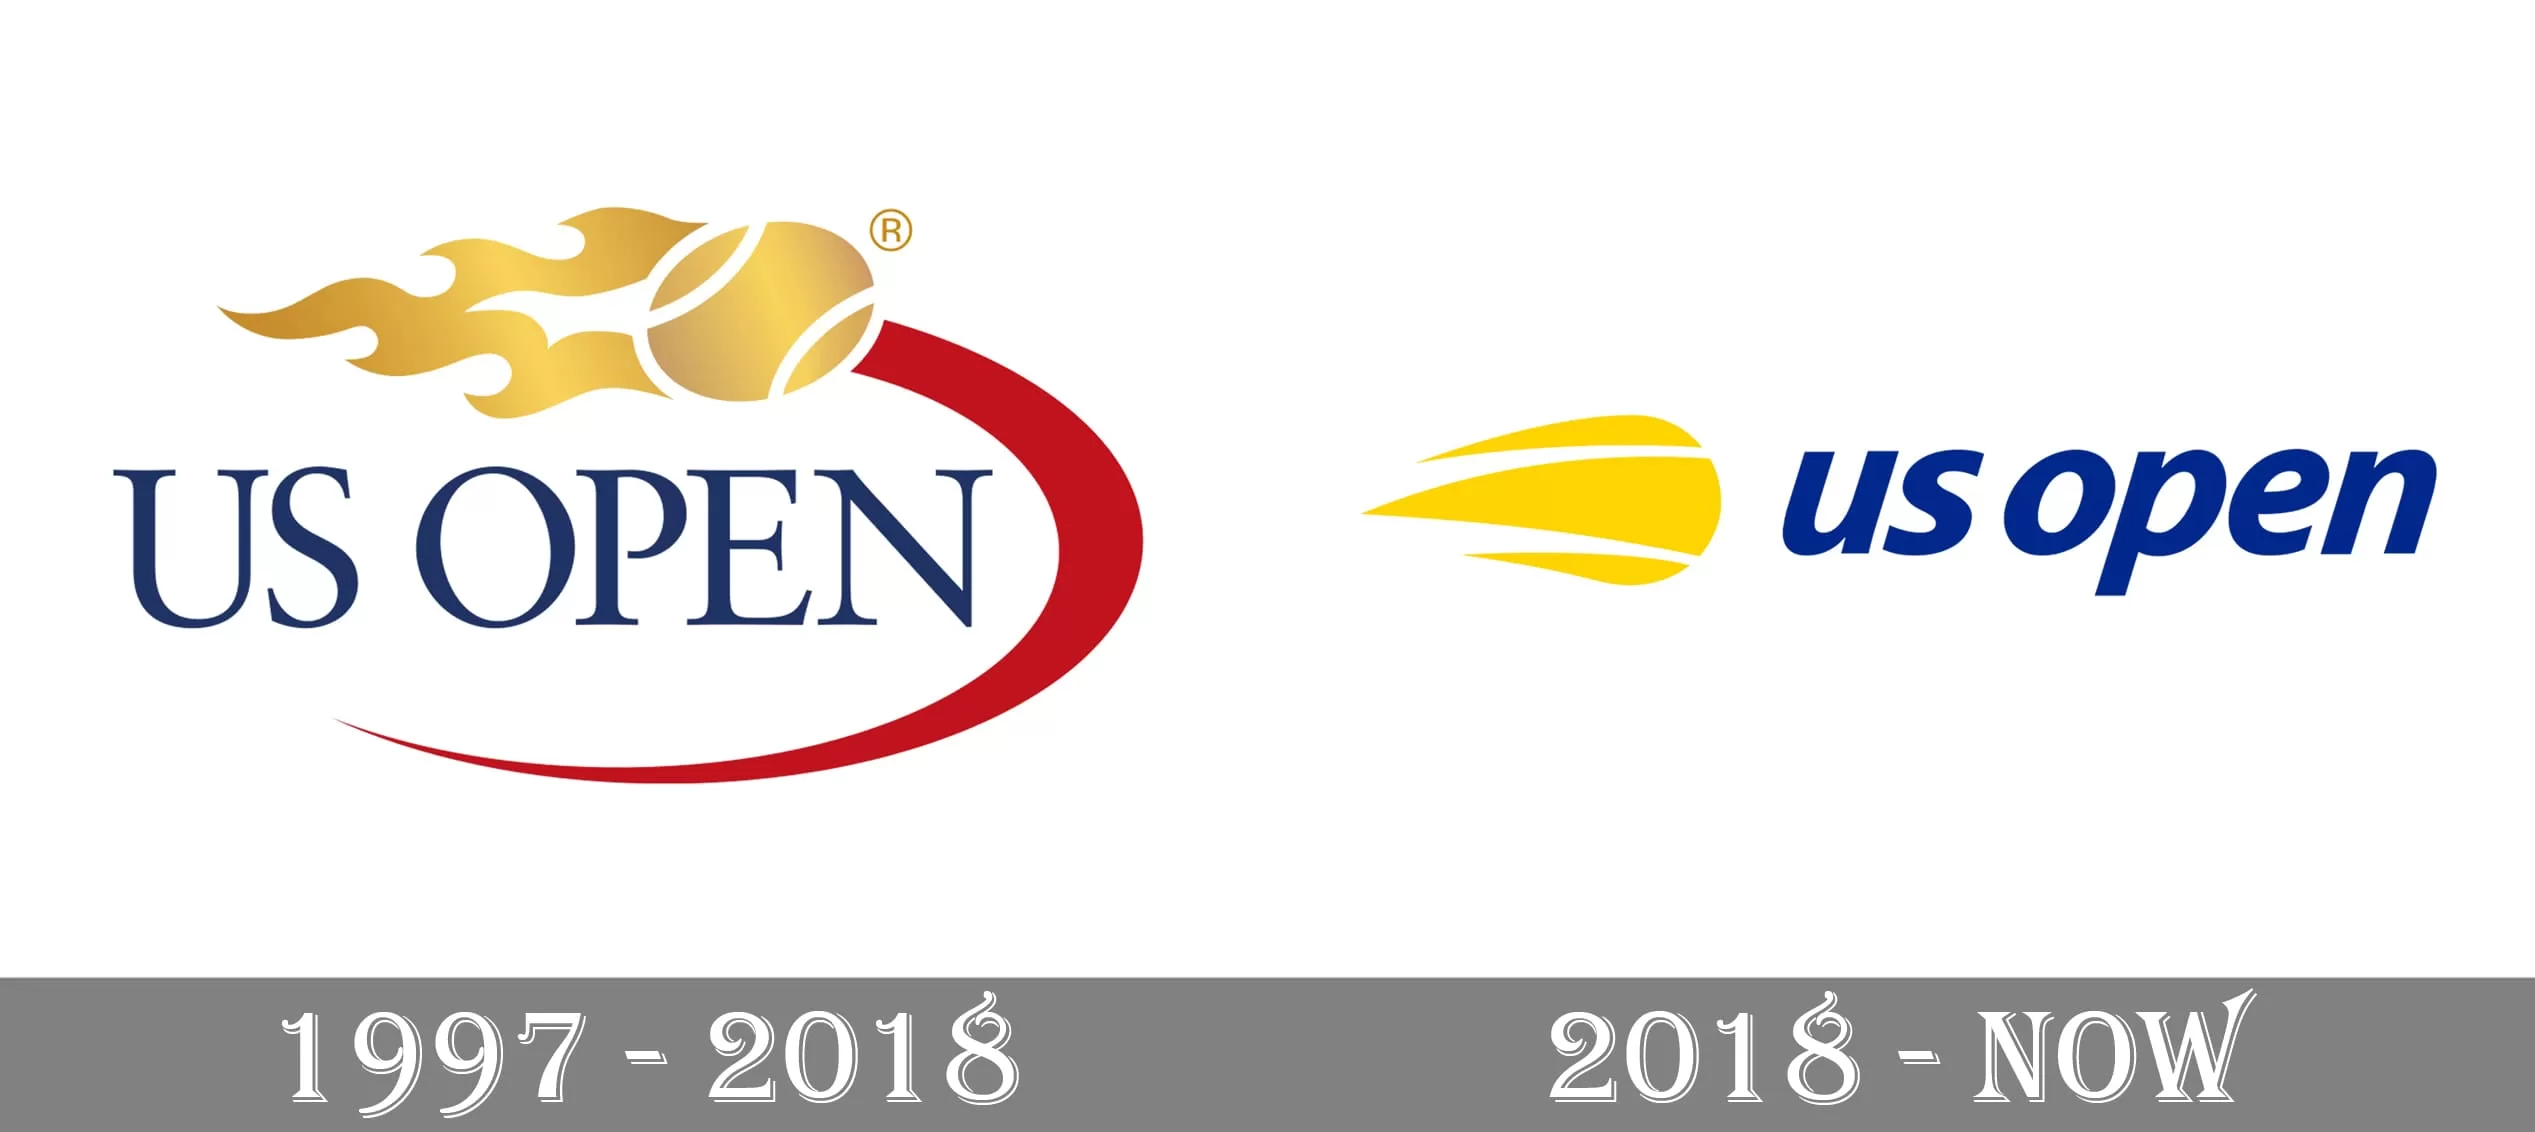 US Open (Tennis): Logo history and 10 fun facts – Games Fun Facts